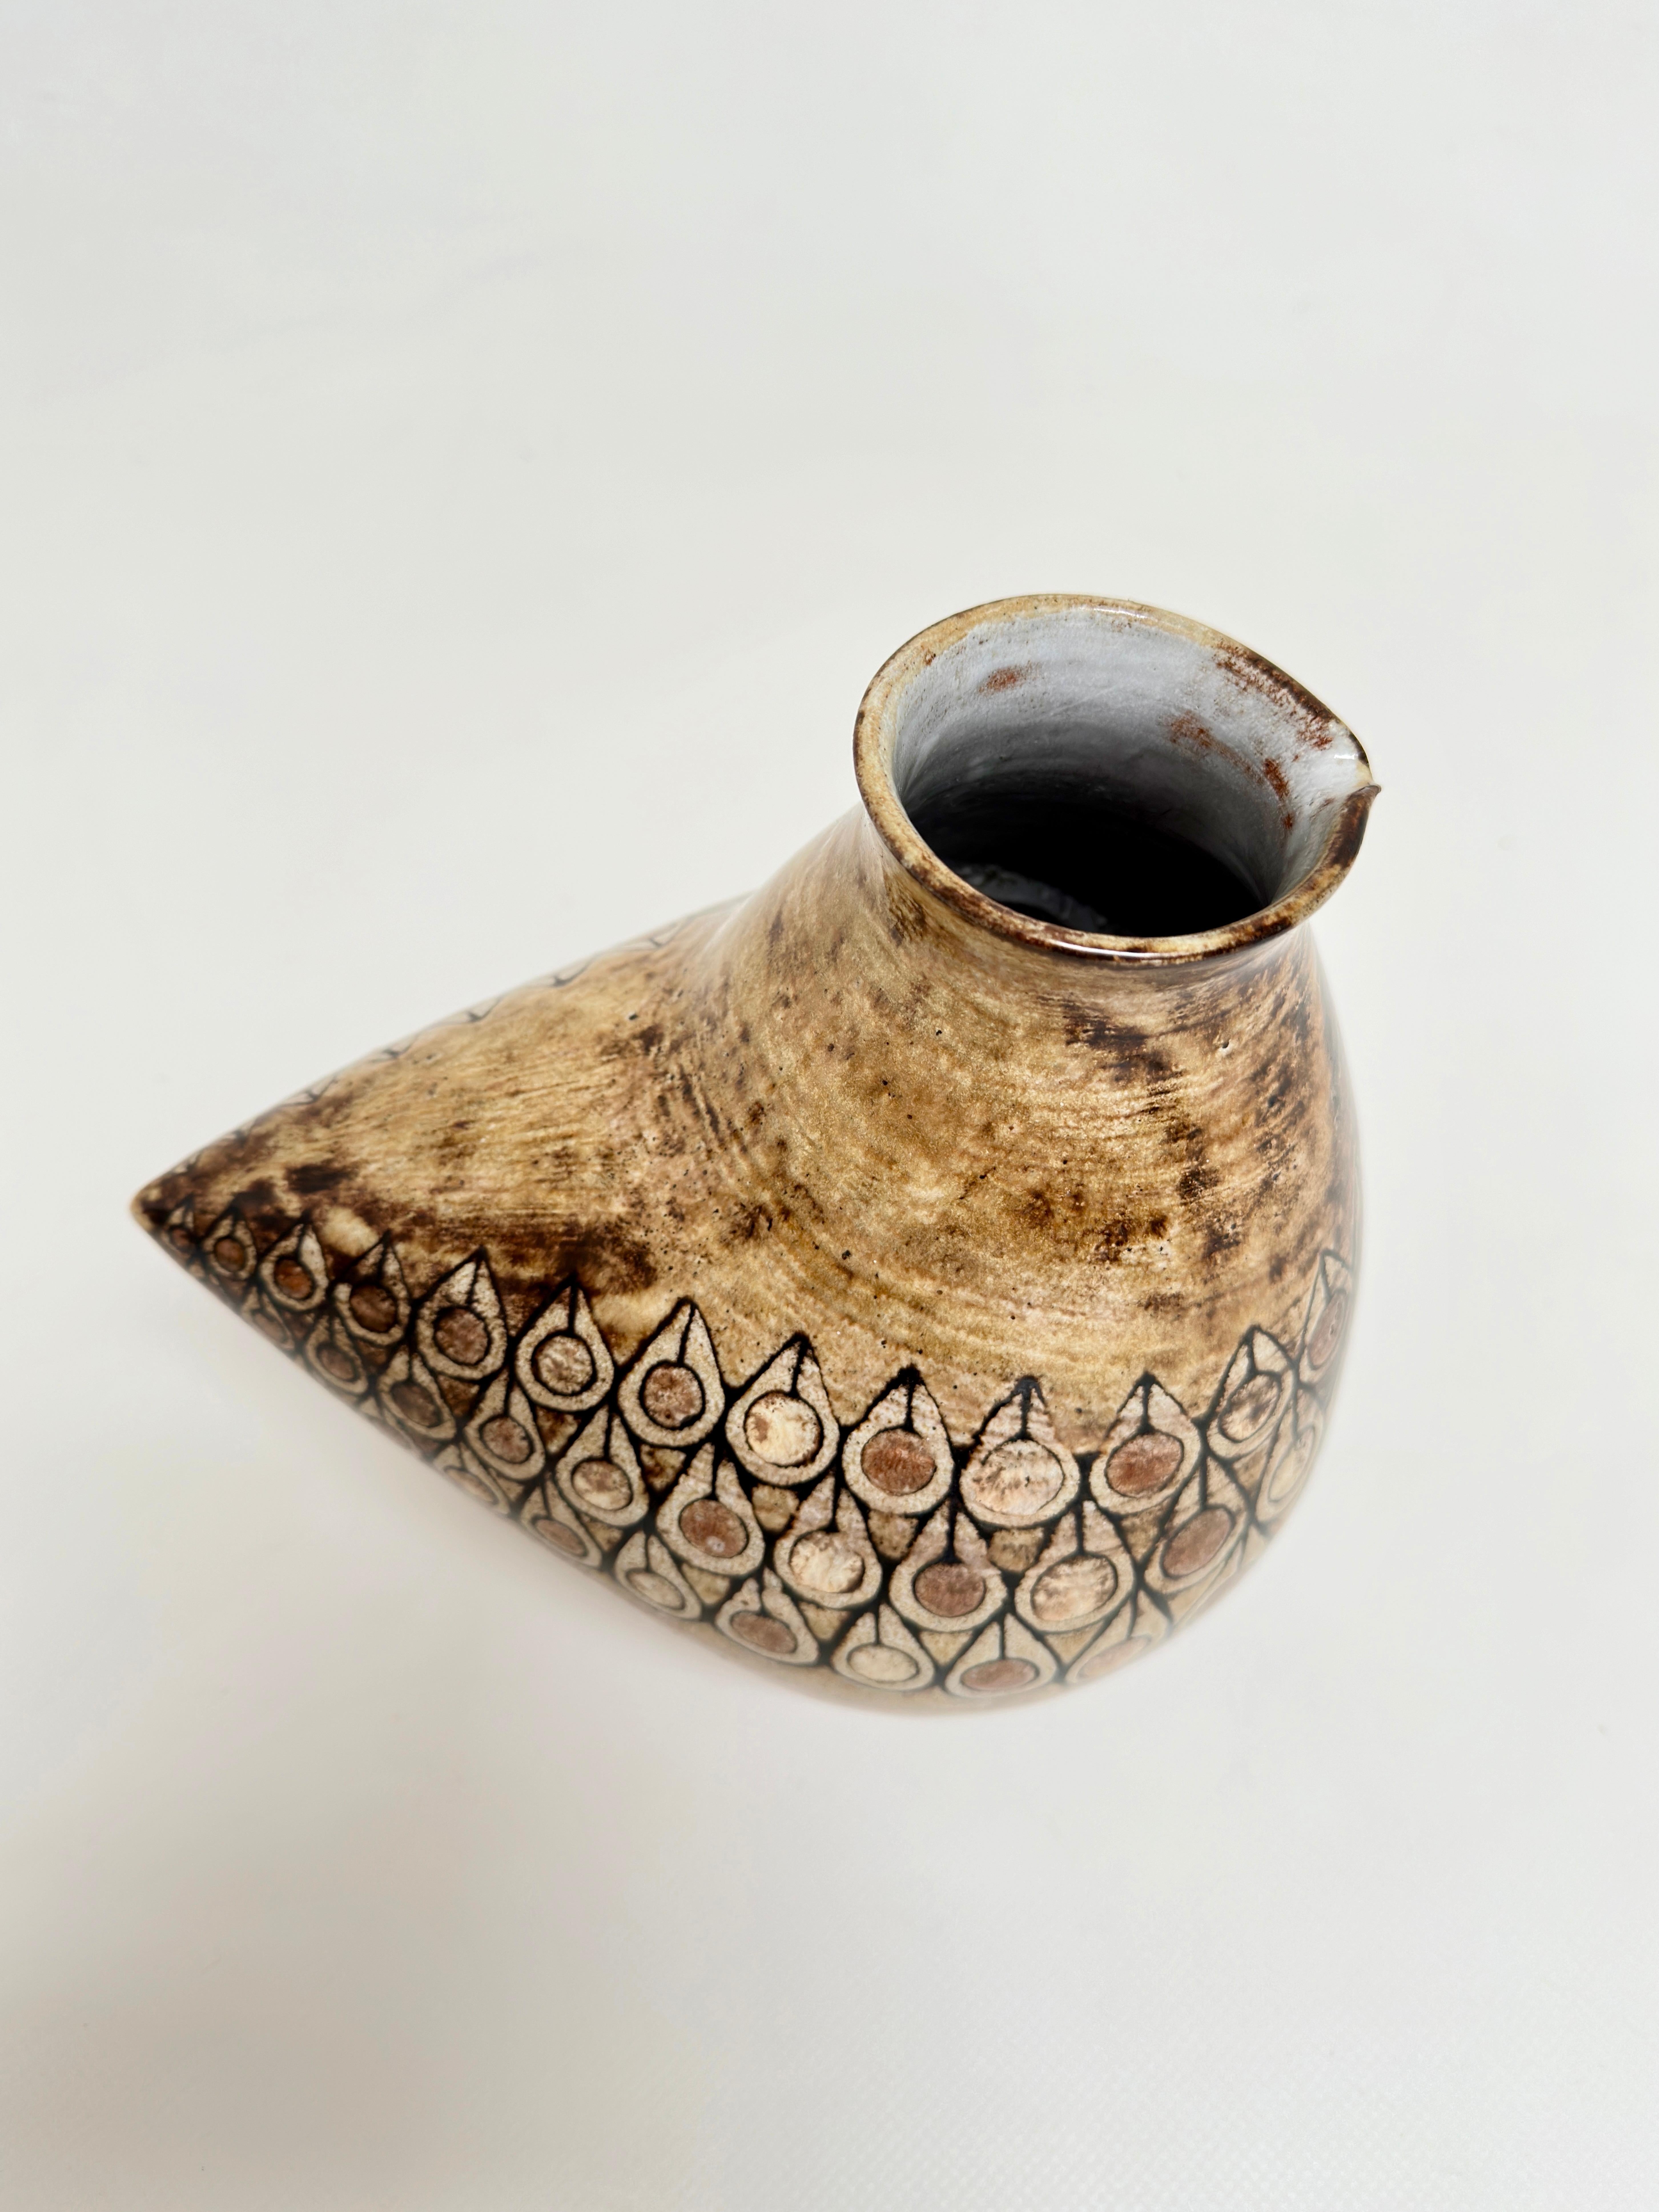 Zoomorphic Vase, Jean-Claude Malarmey, Vallauris c. 1960 In Excellent Condition For Sale In St Ouen, FR